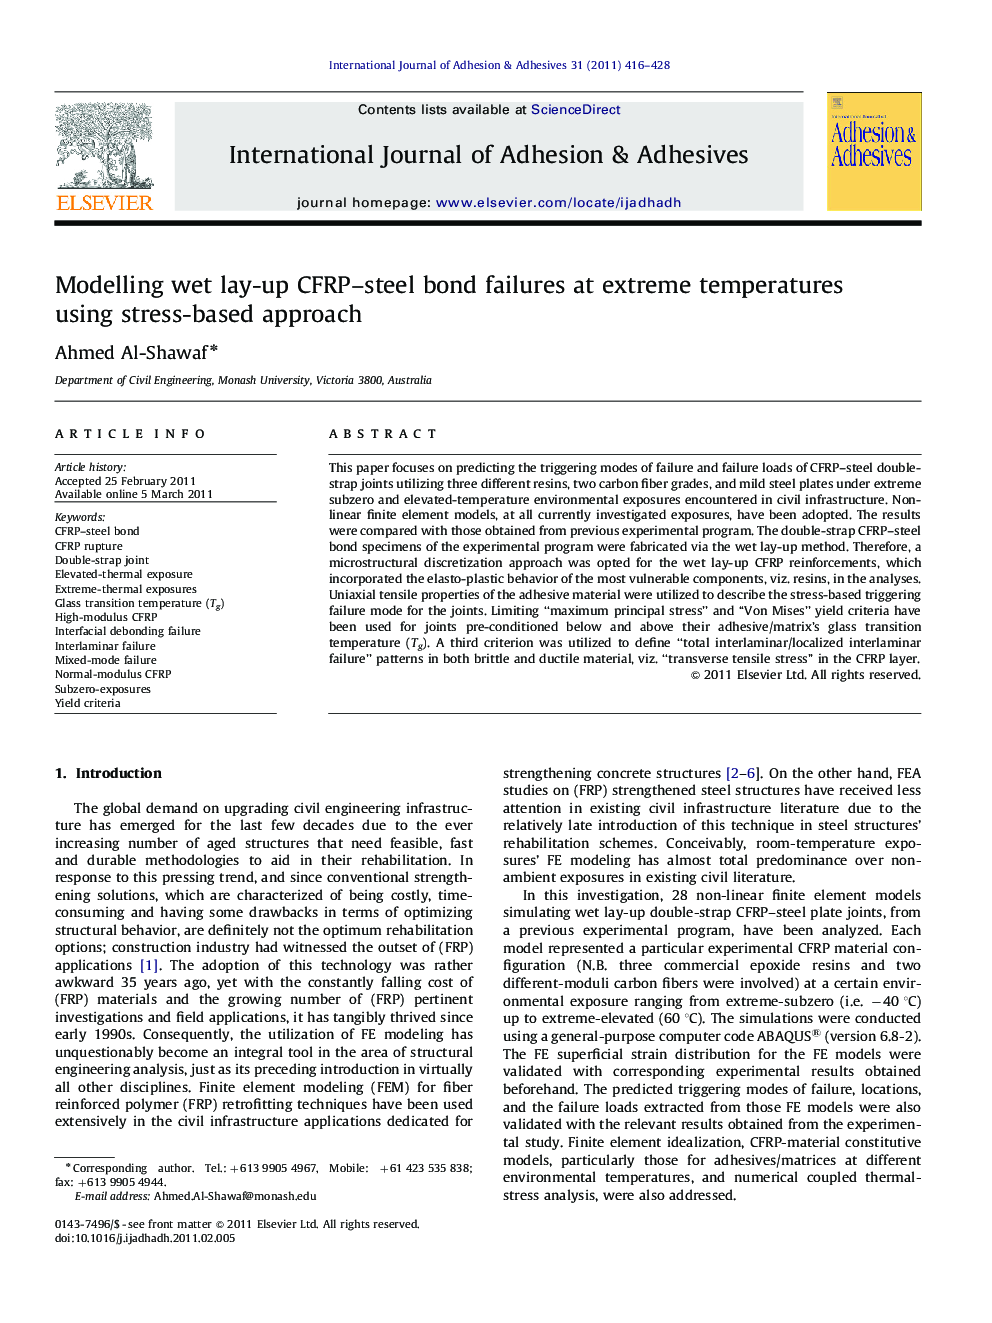 Modelling wet lay-up CFRP–steel bond failures at extreme temperatures using stress-based approach